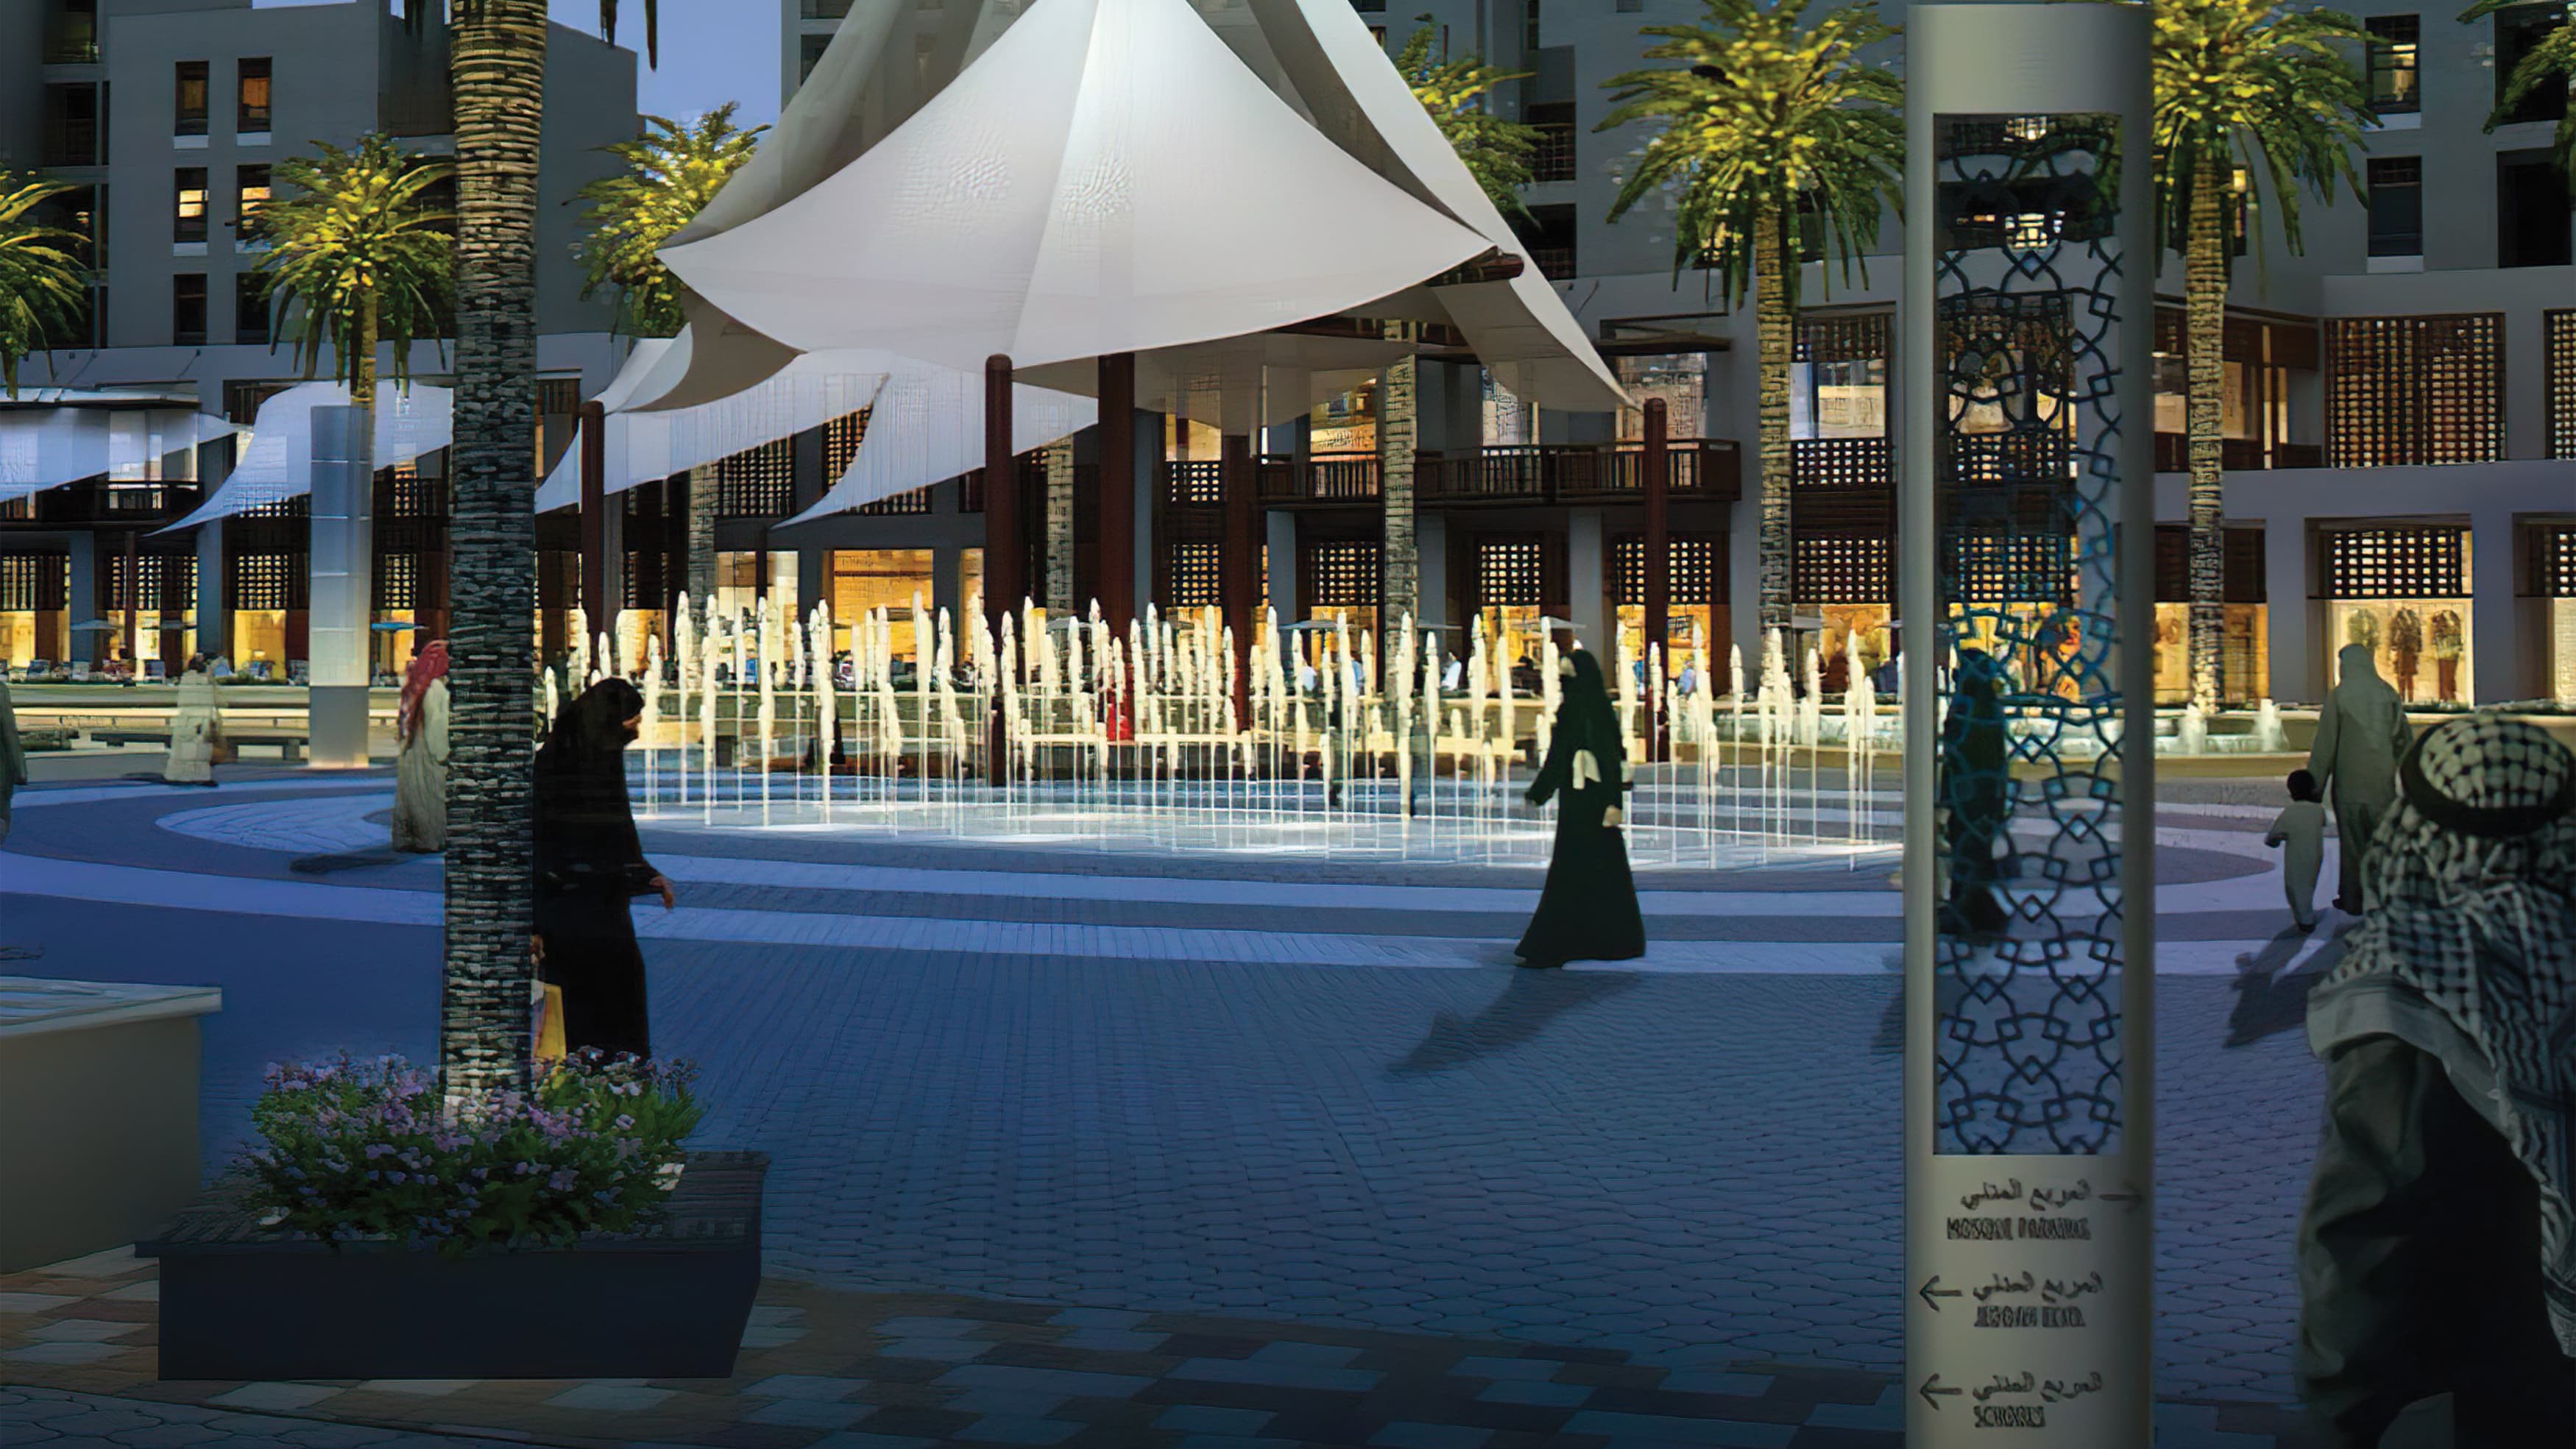 A rendering depicting a fountain and pedestrian directional signage.